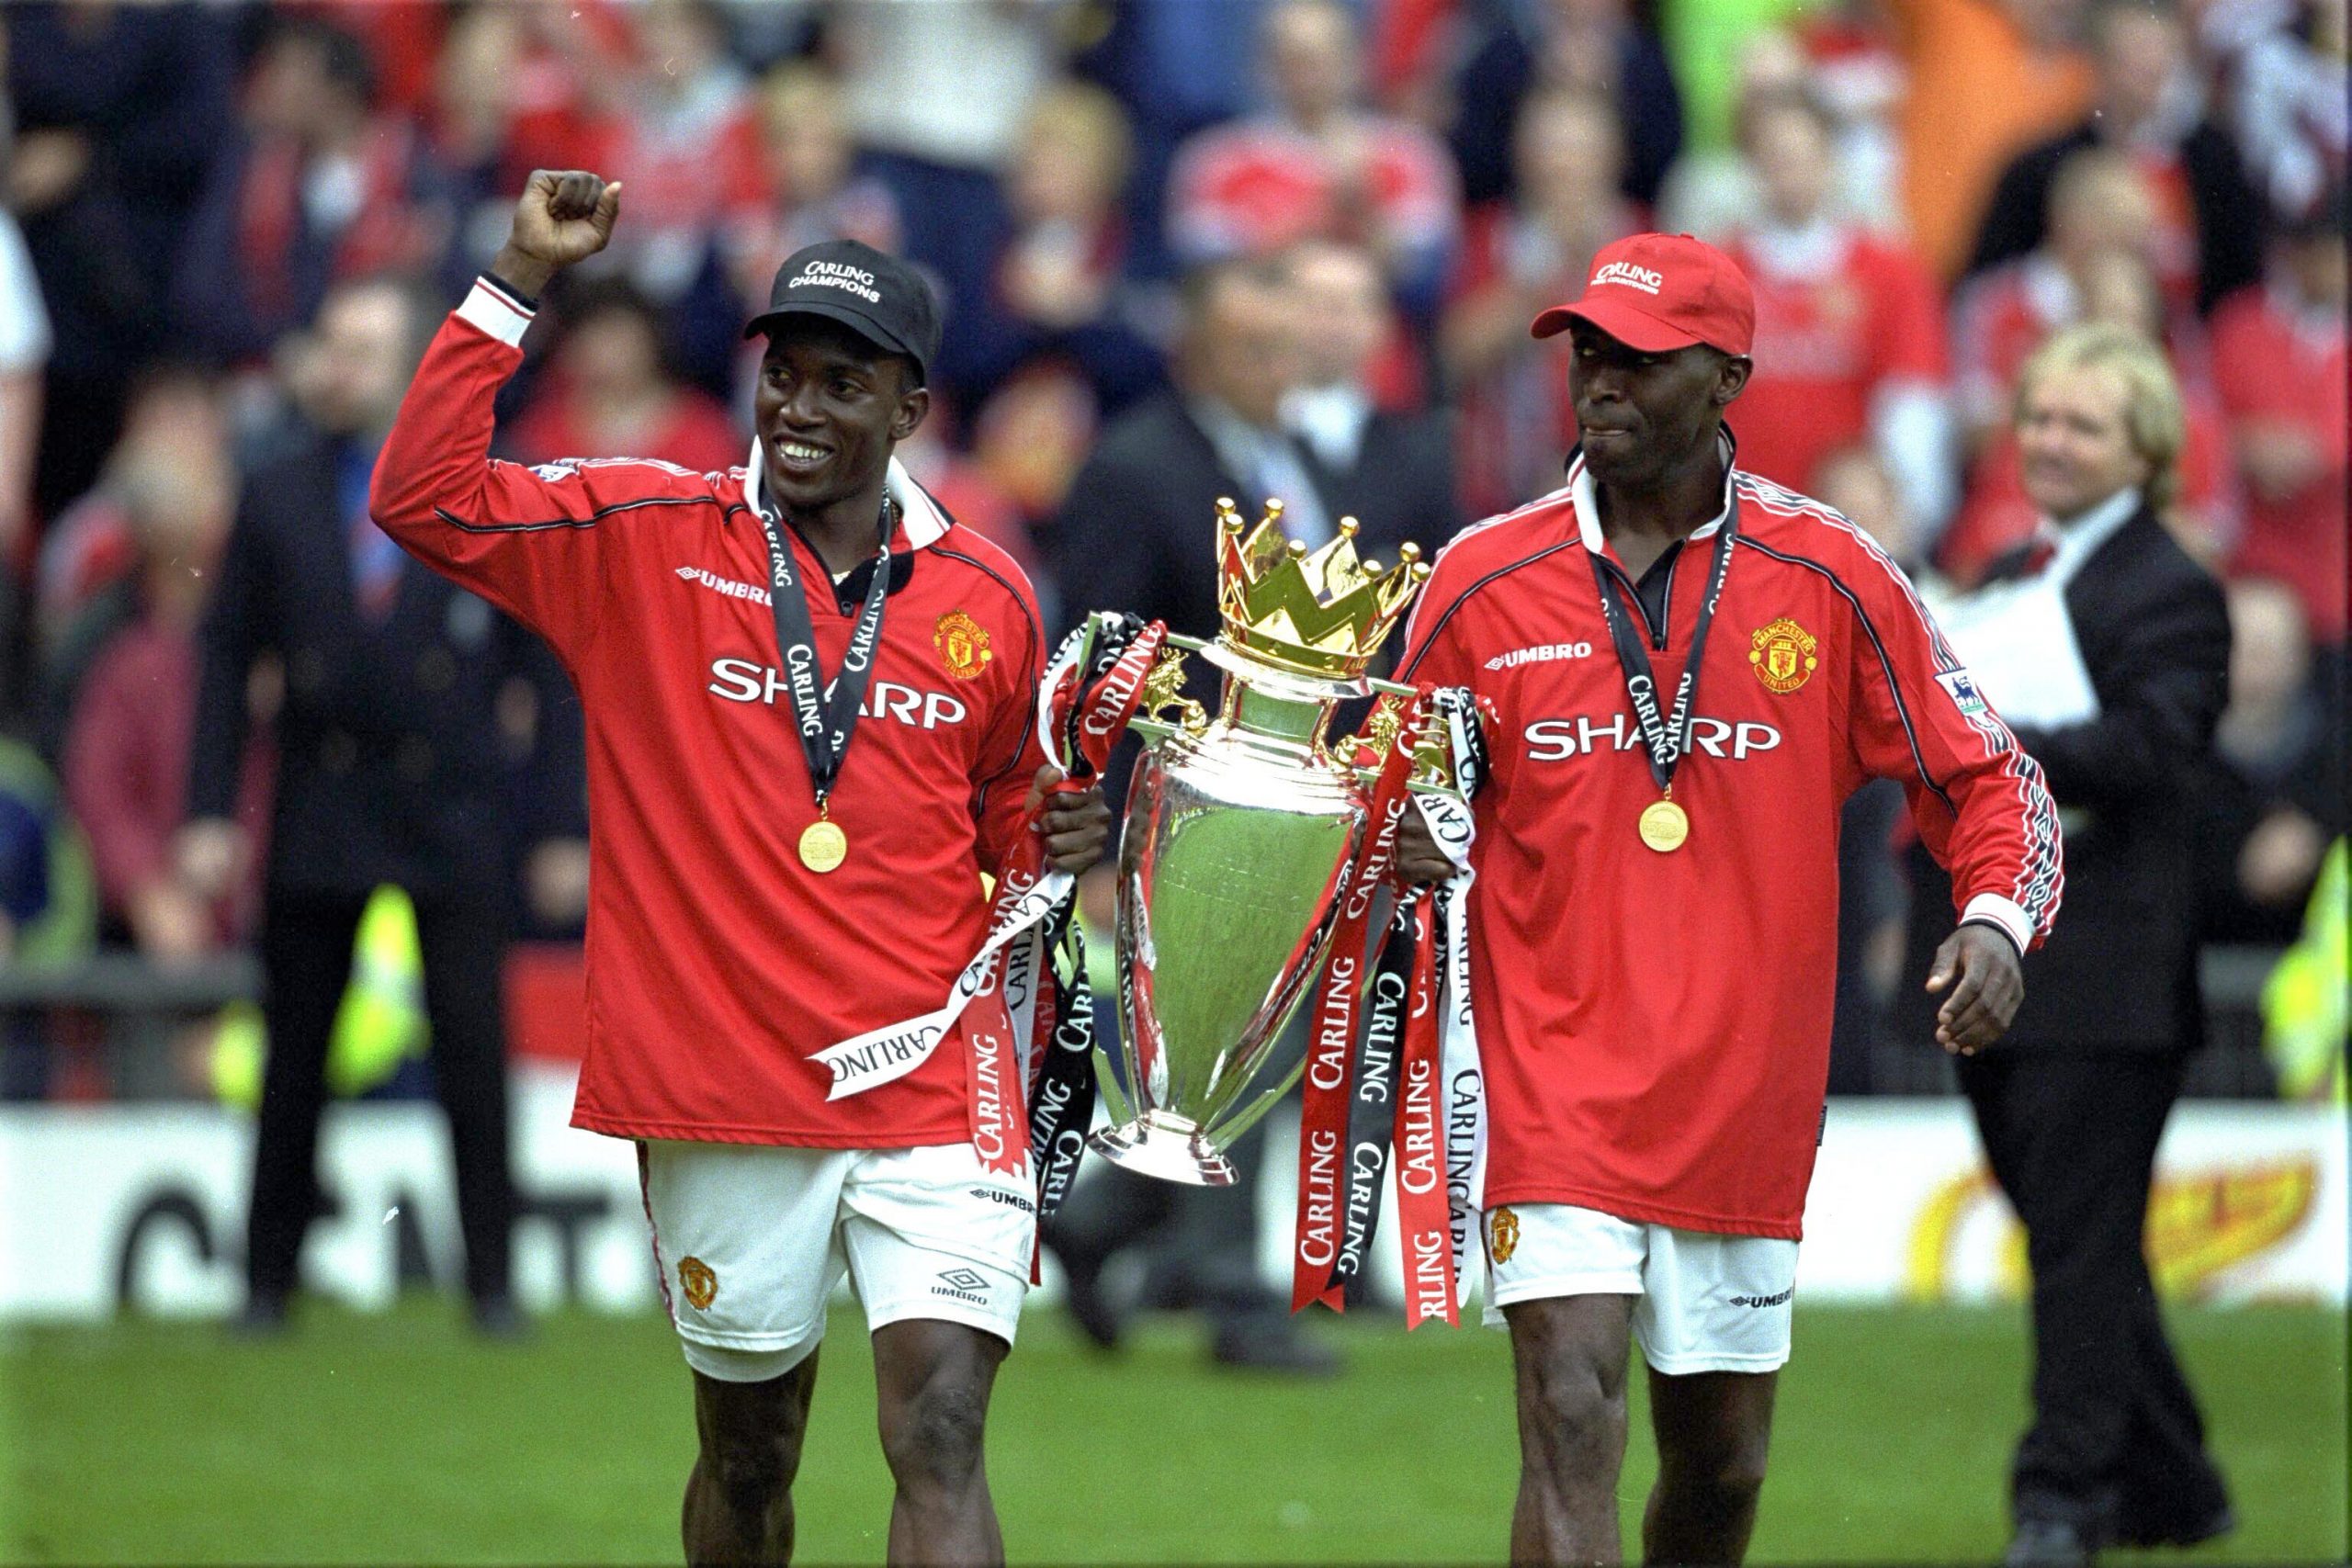 The Analyst’s Premier League History Part II: The Treble, The Invincibles and the Flying Dutchman